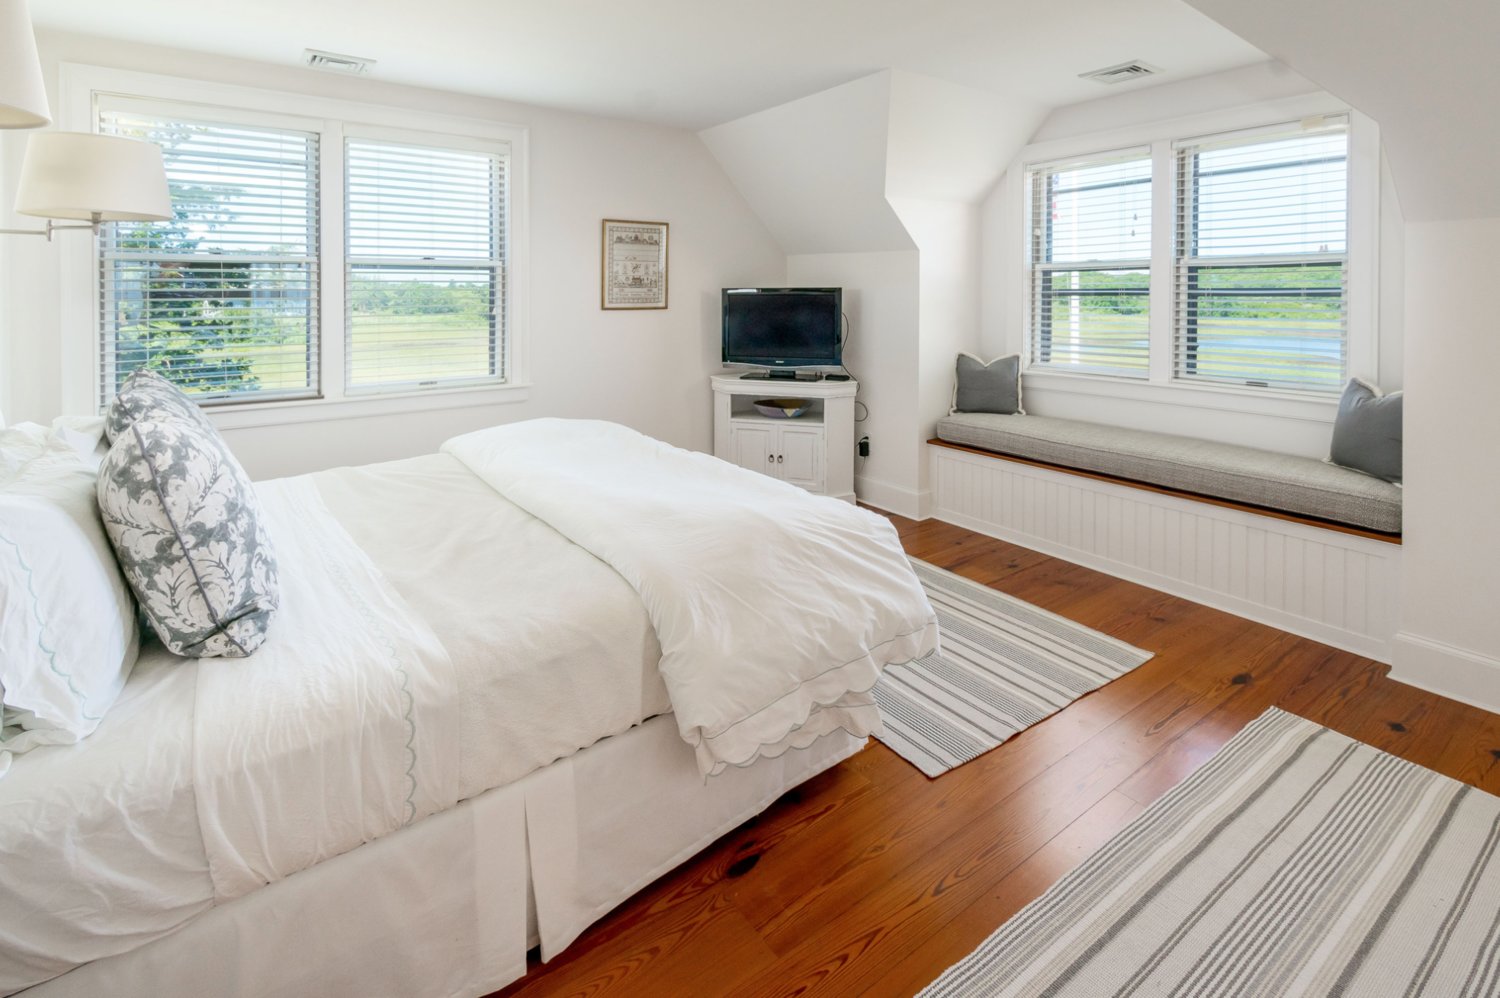 This bedroom has a window seat with sweeping views of Polpis Harbor.